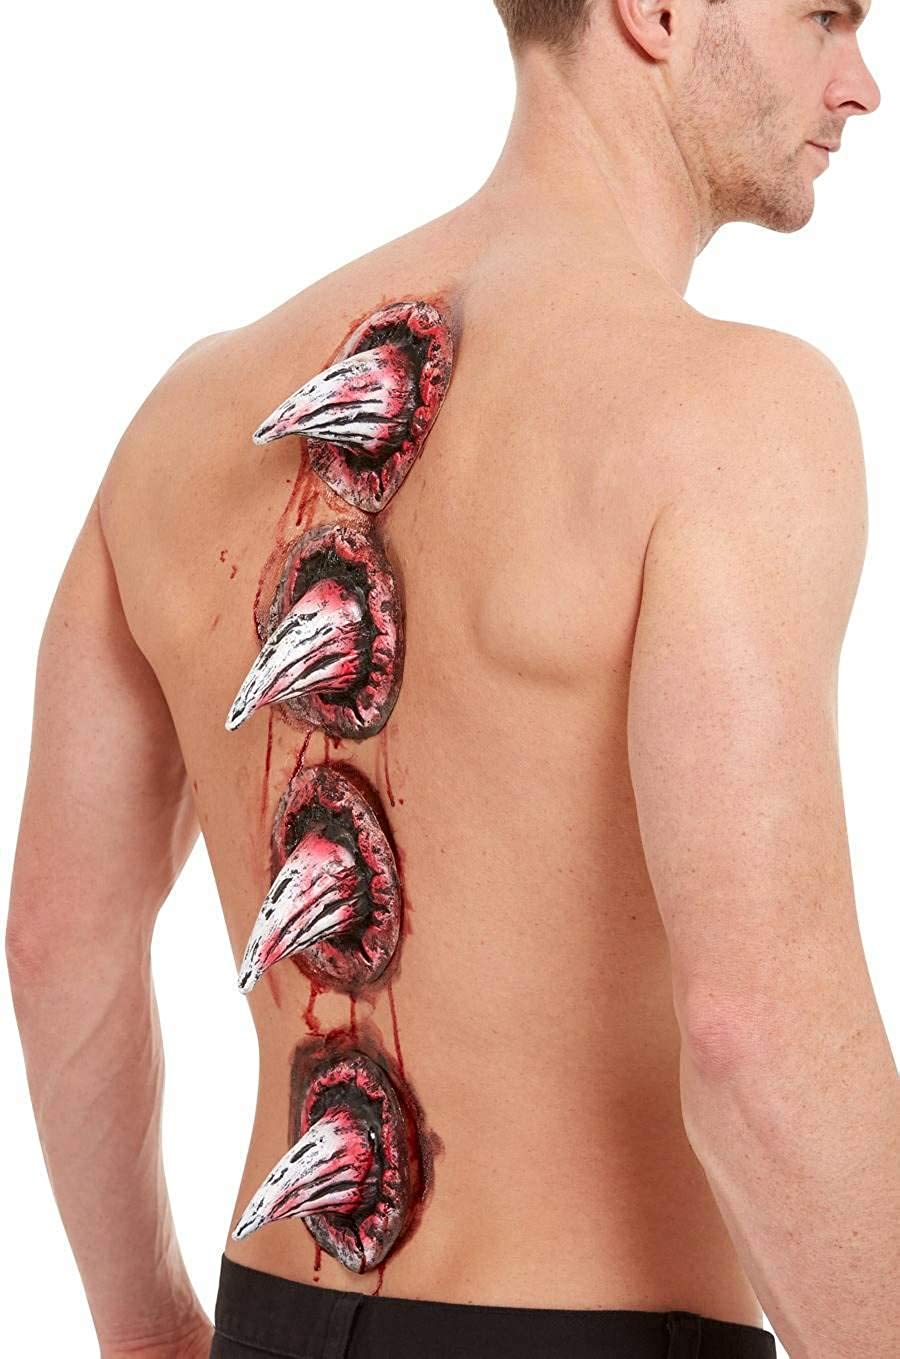 Smiffys 50821 Make-Up FX, Latex Spike Wounds, Unisex Adult, Red